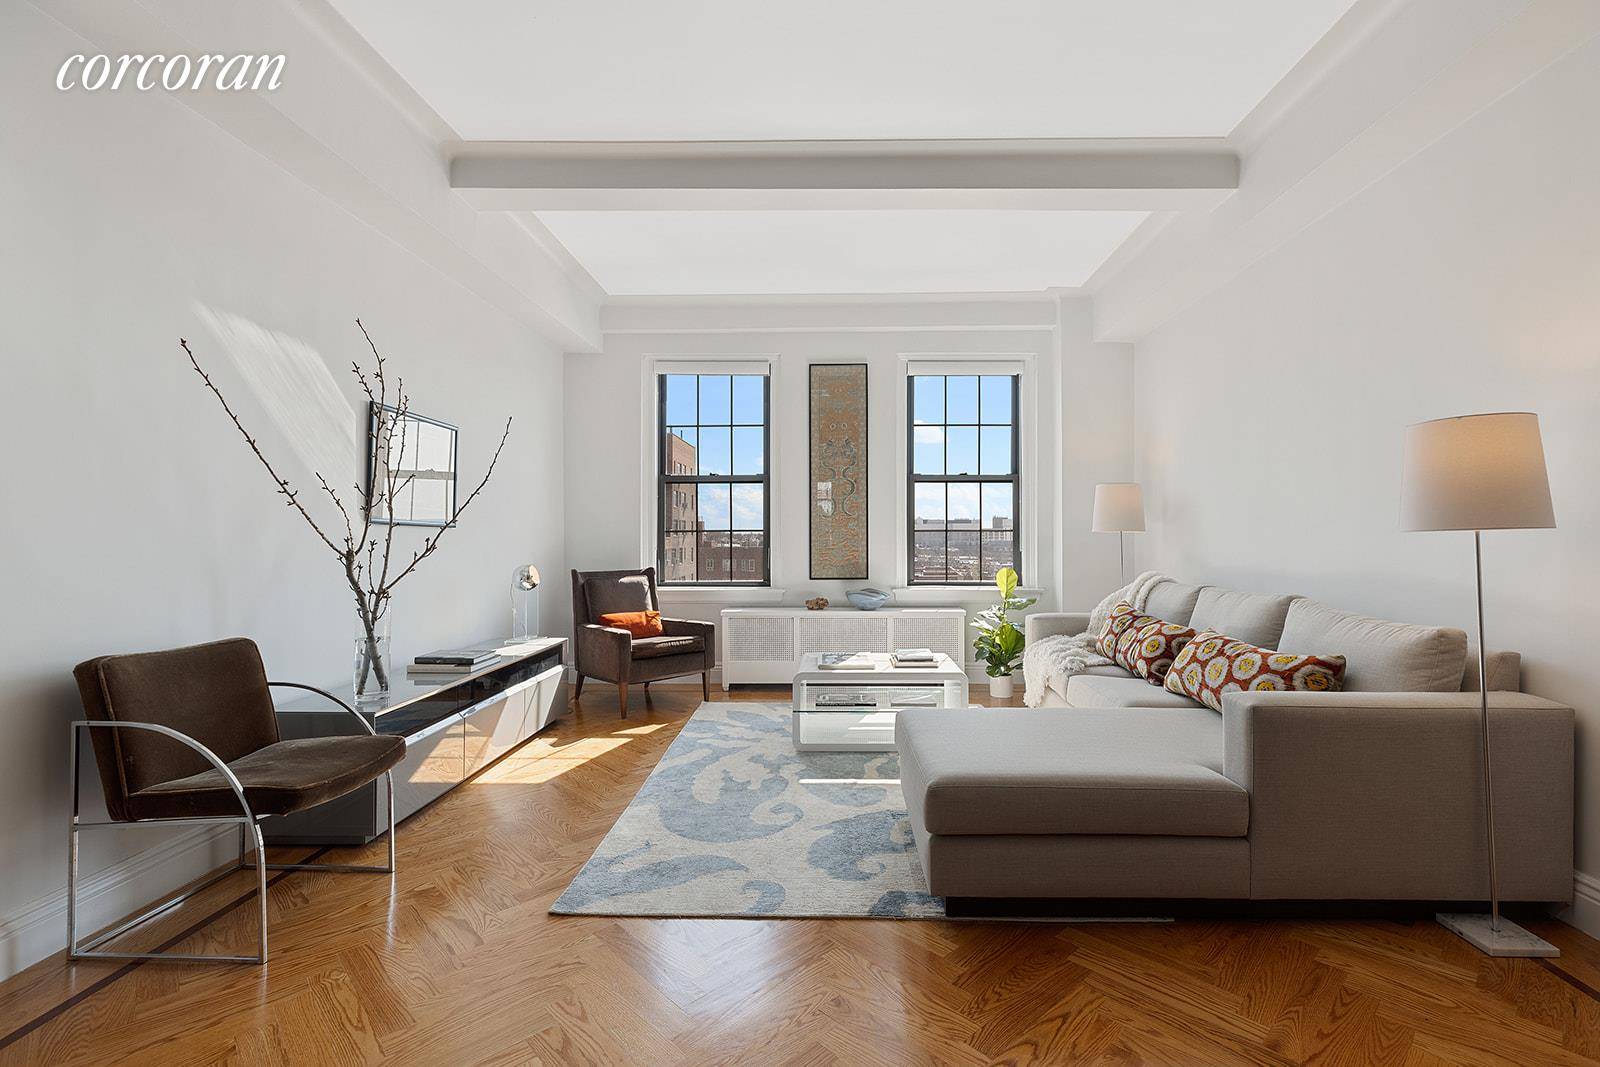 90 8th Avenue, Apt 9D With skyline views over three exposures, this expansive and recently renovated home has generous prewar proportions, classic details, and exceptional light.